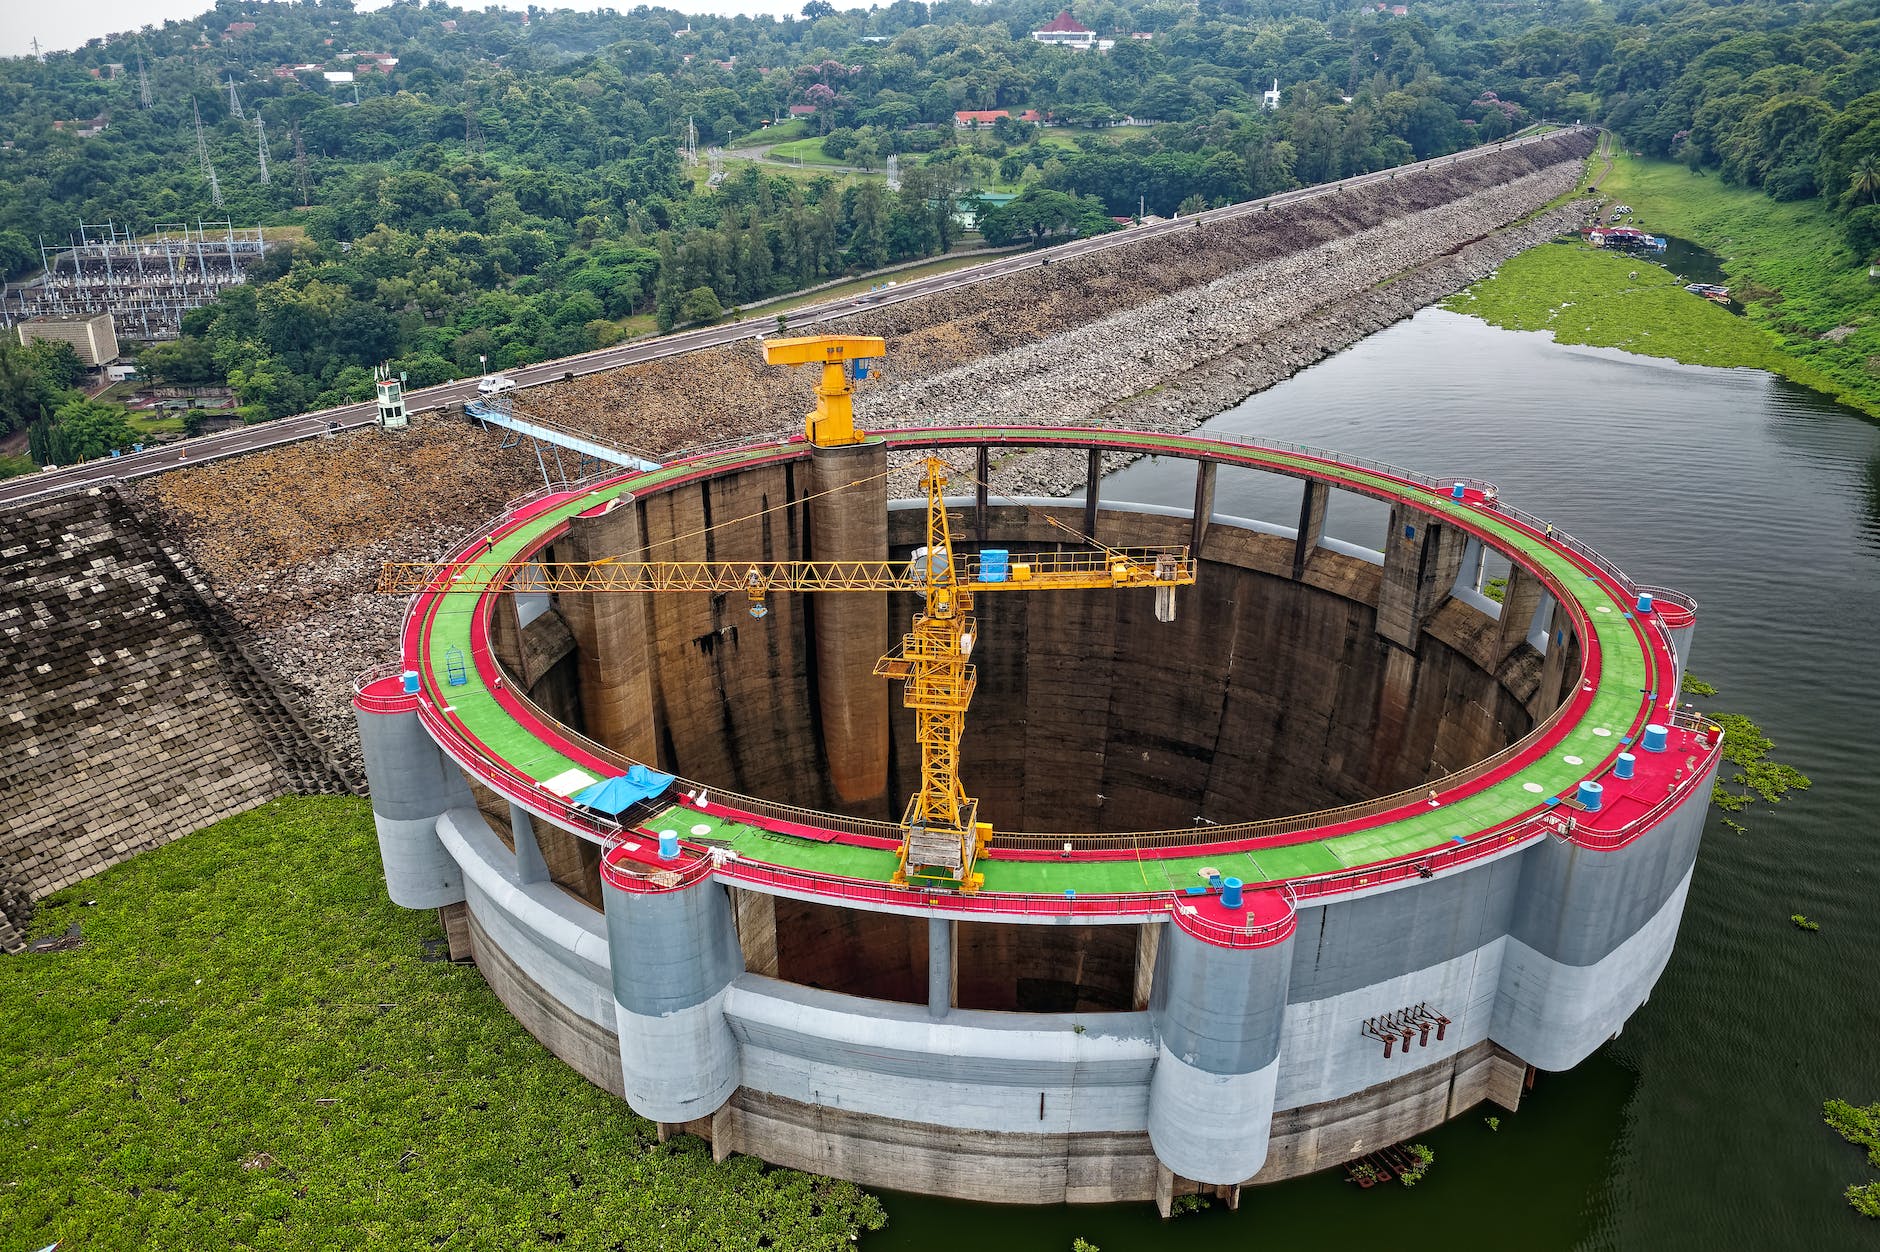 Overhead view of overspill chamber undergoing construction work